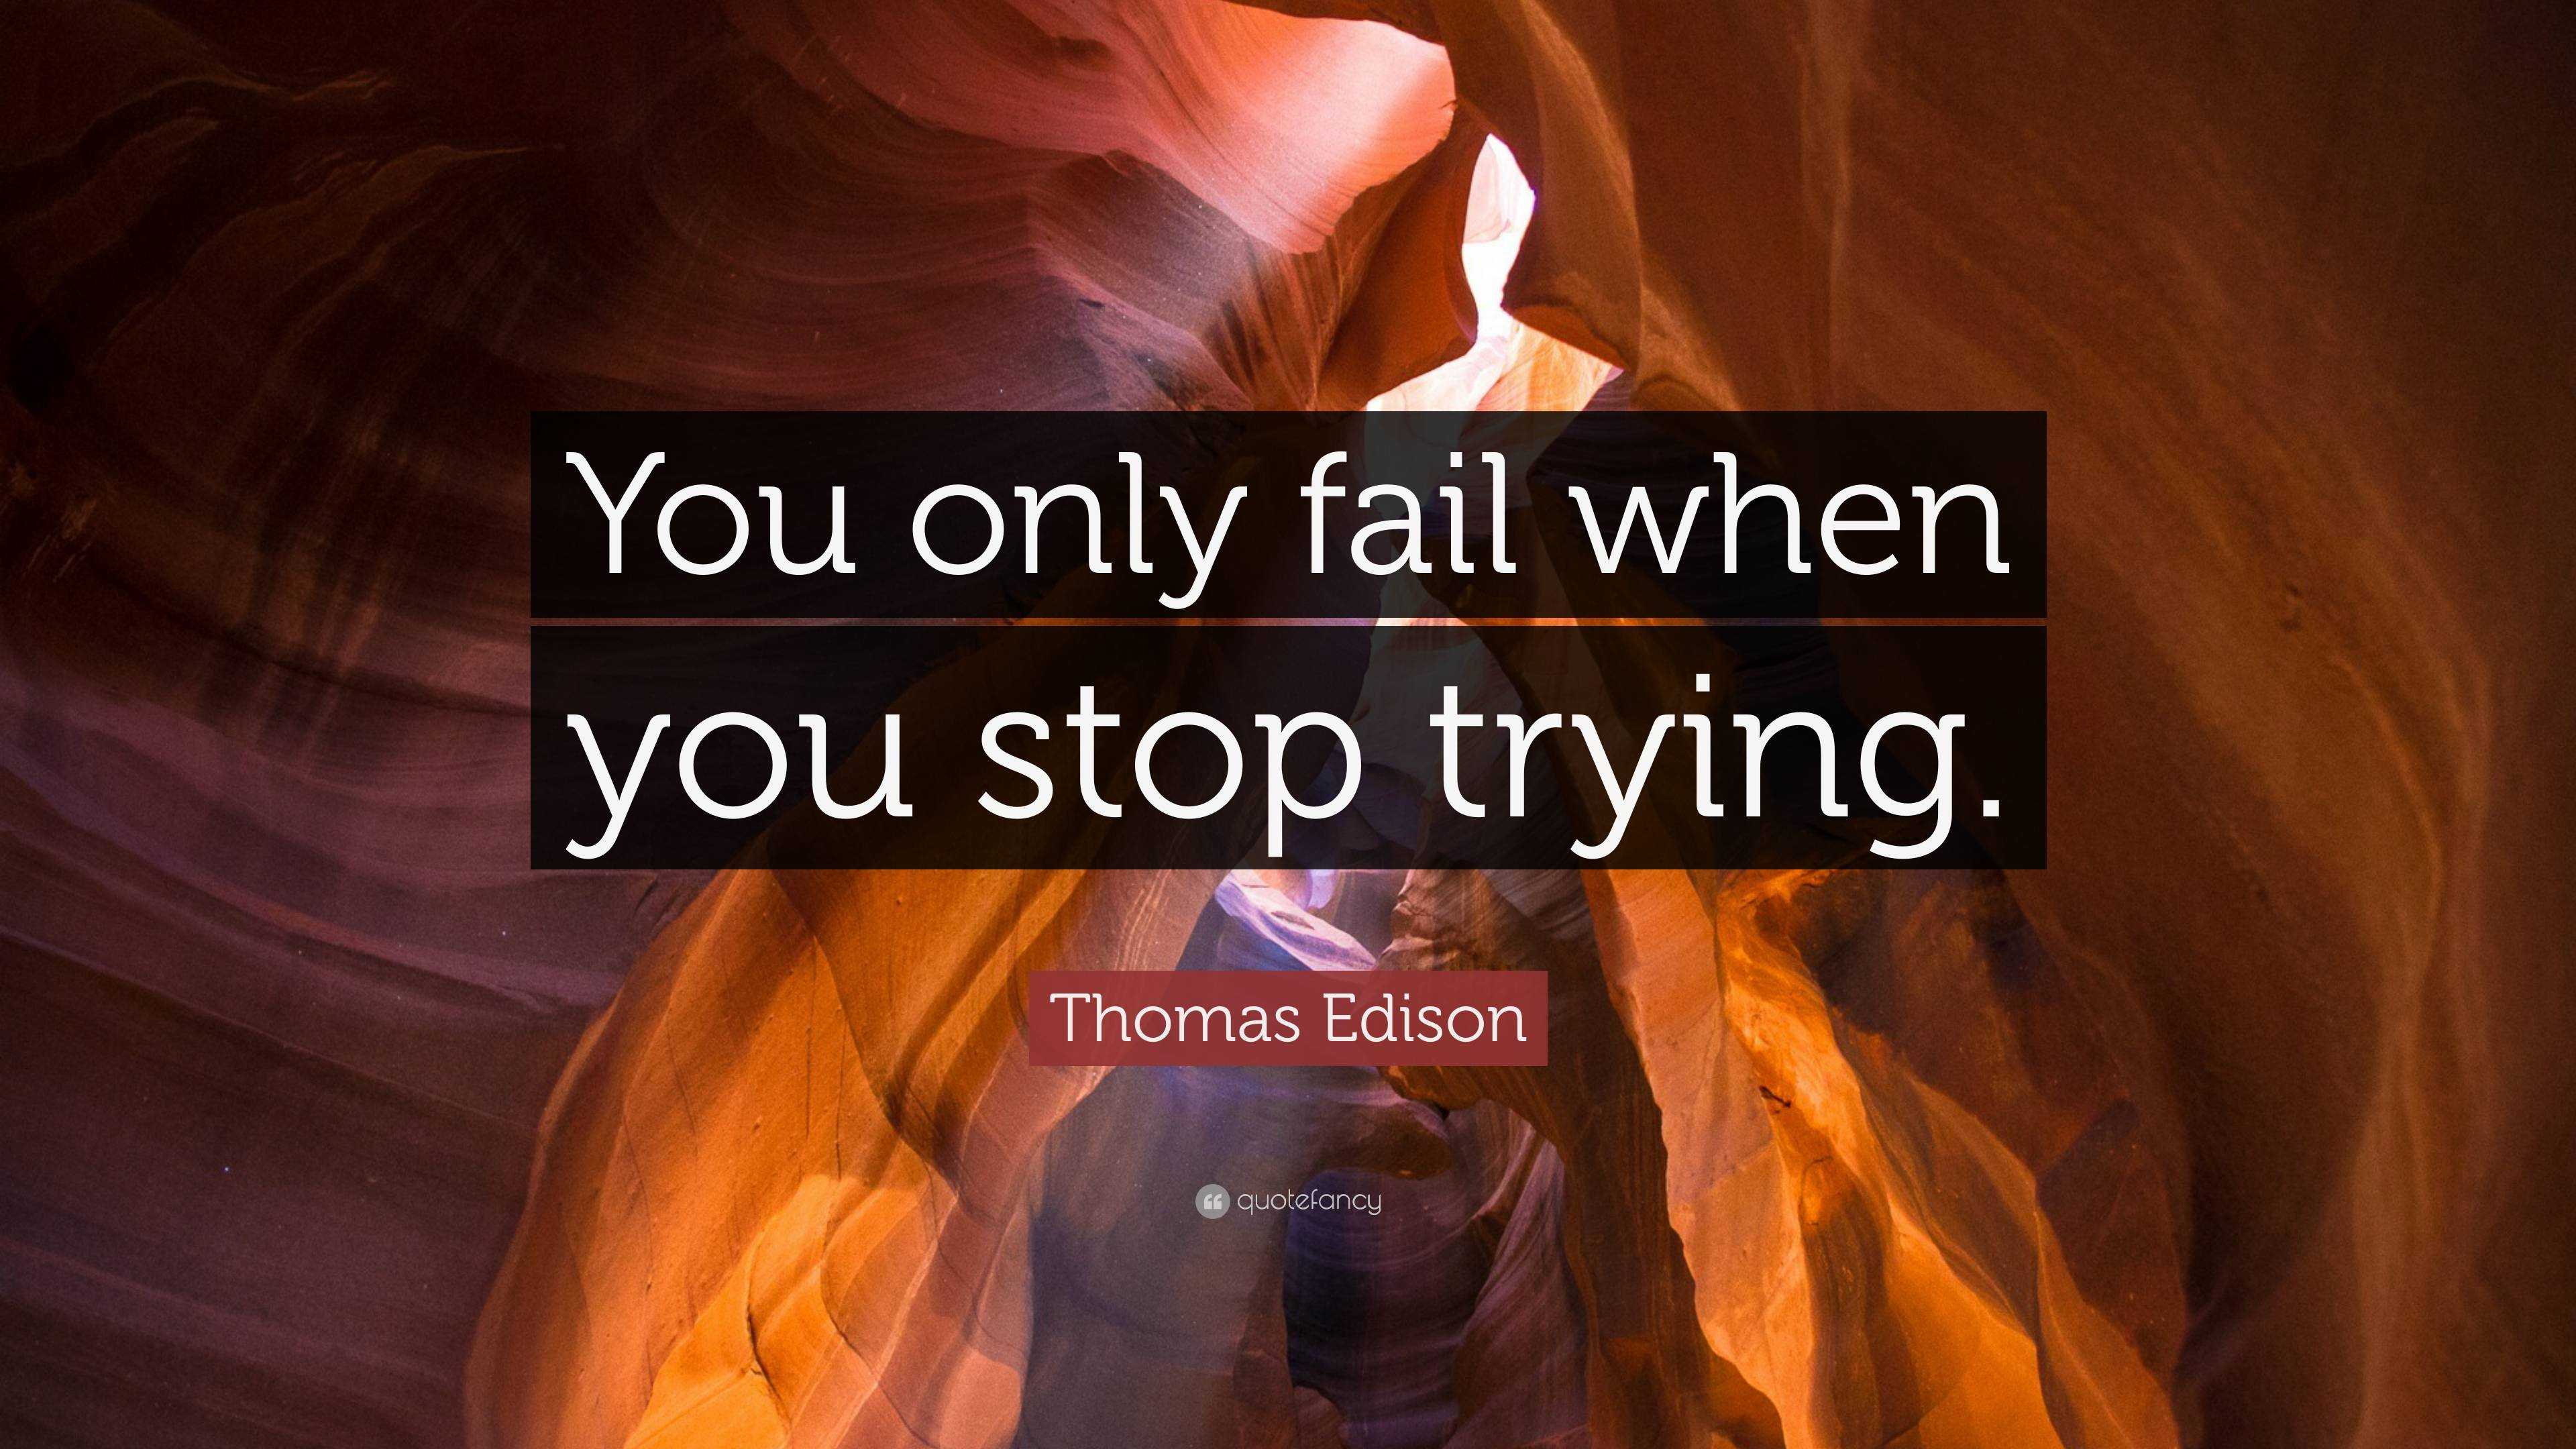 Thomas Edison Quote: “You only fail when you stop trying.”